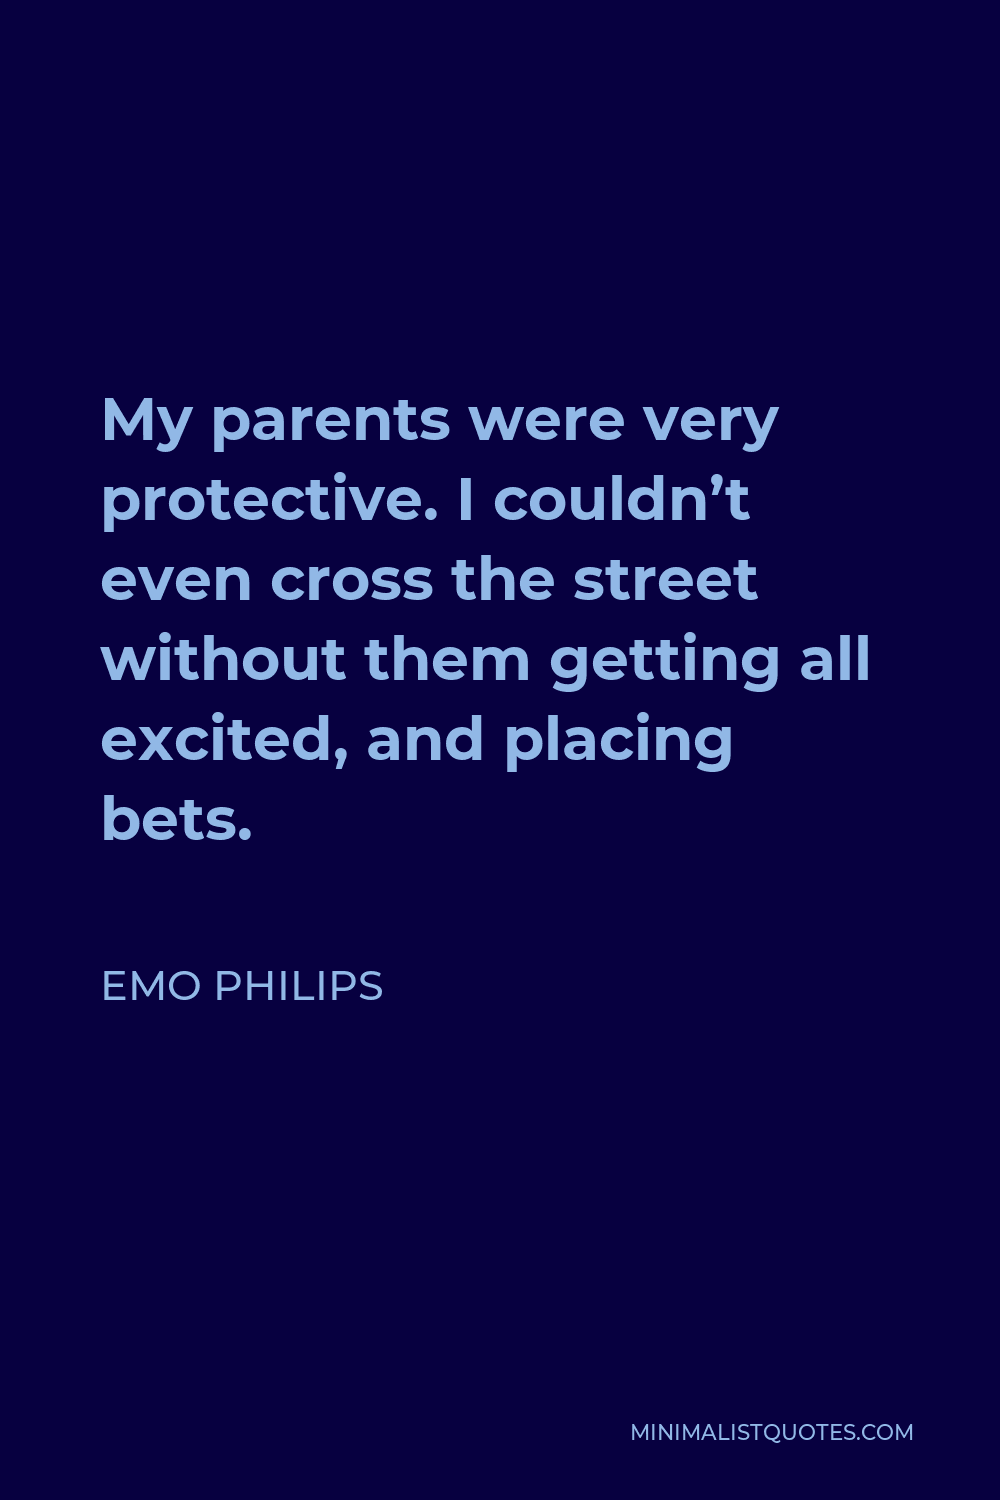 Emo Philips Quote - My parents were very protective. I couldn’t even cross the street without them getting all excited, and placing bets.